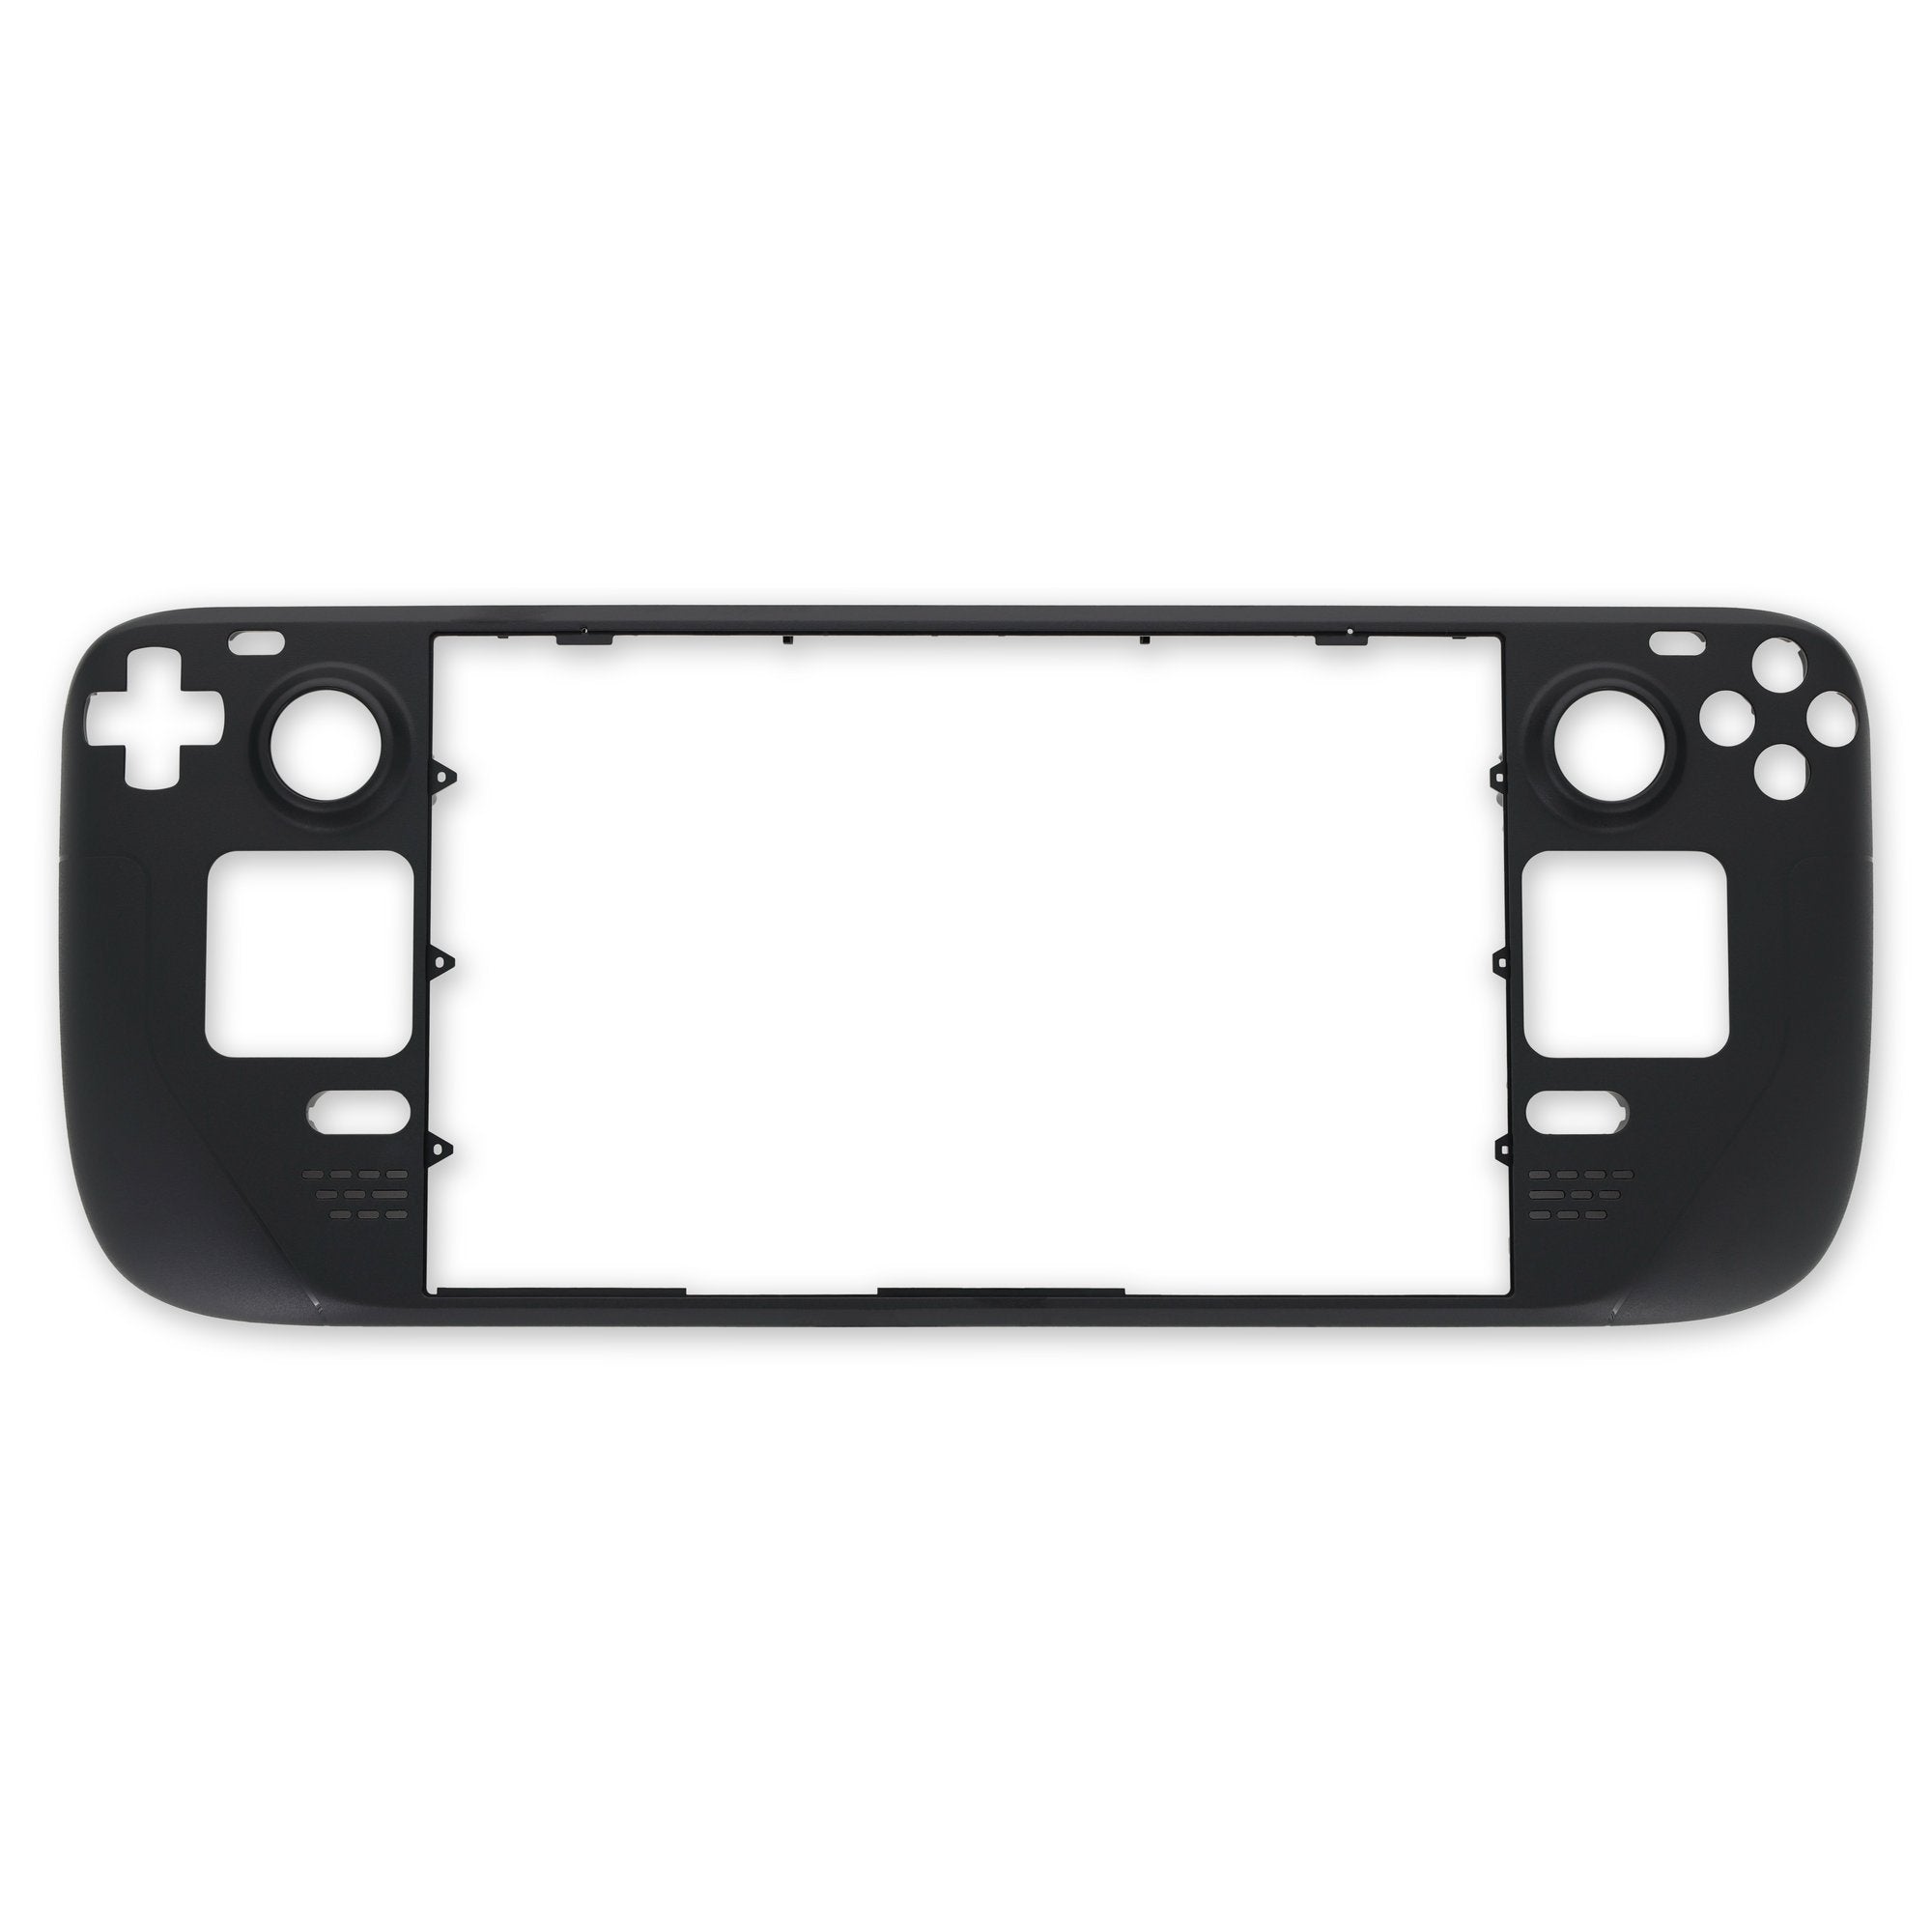 Steam Deck OLED Front Plate New